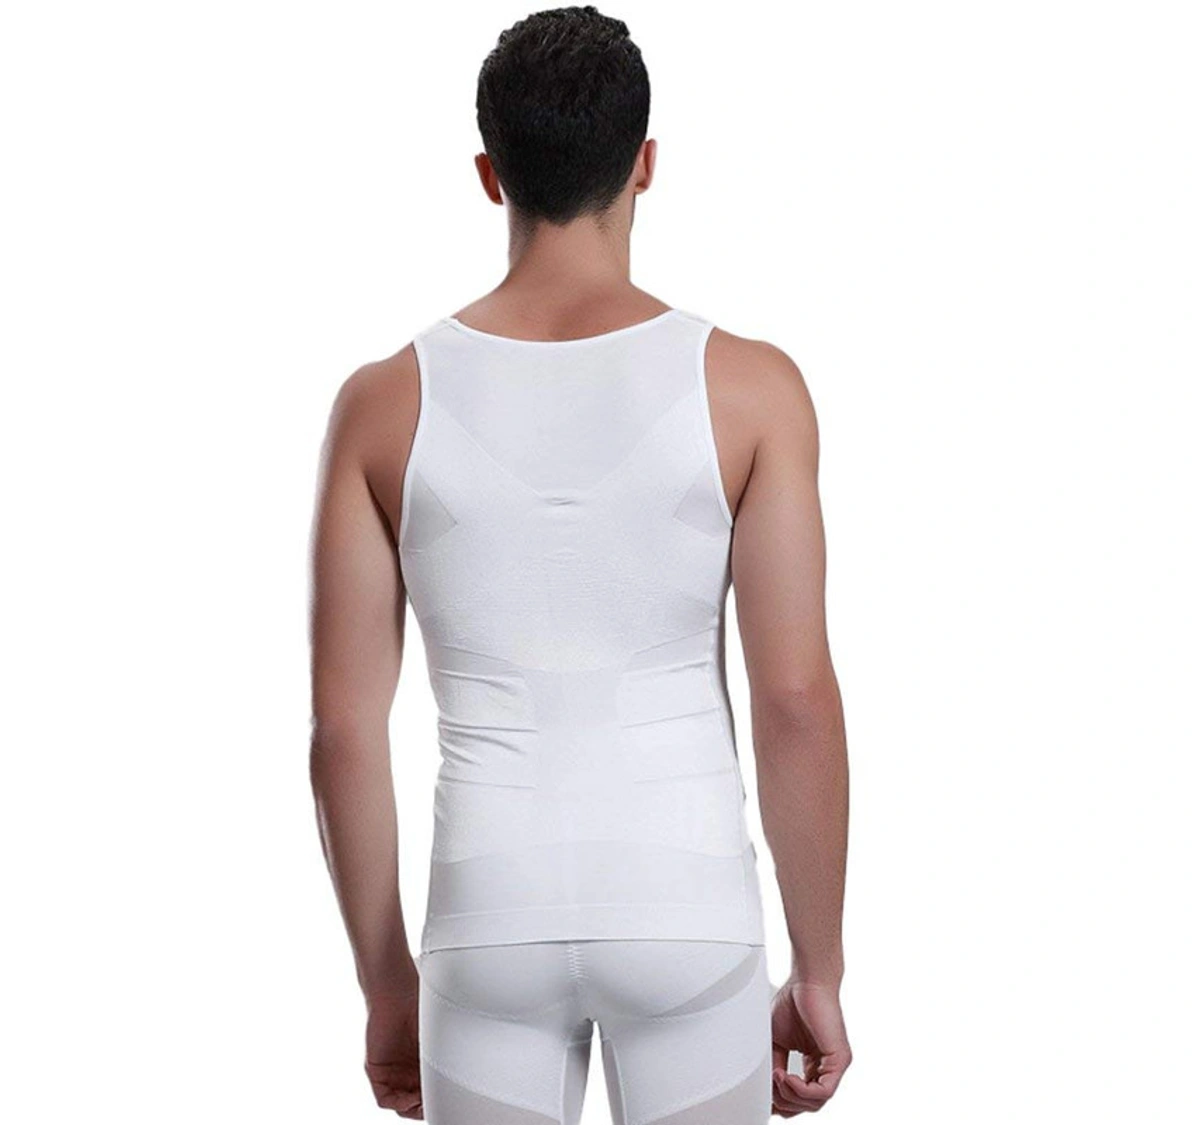 Imported Slim And Lift Slimming Shirt - Slimming Vest And Body Shaper For  Men